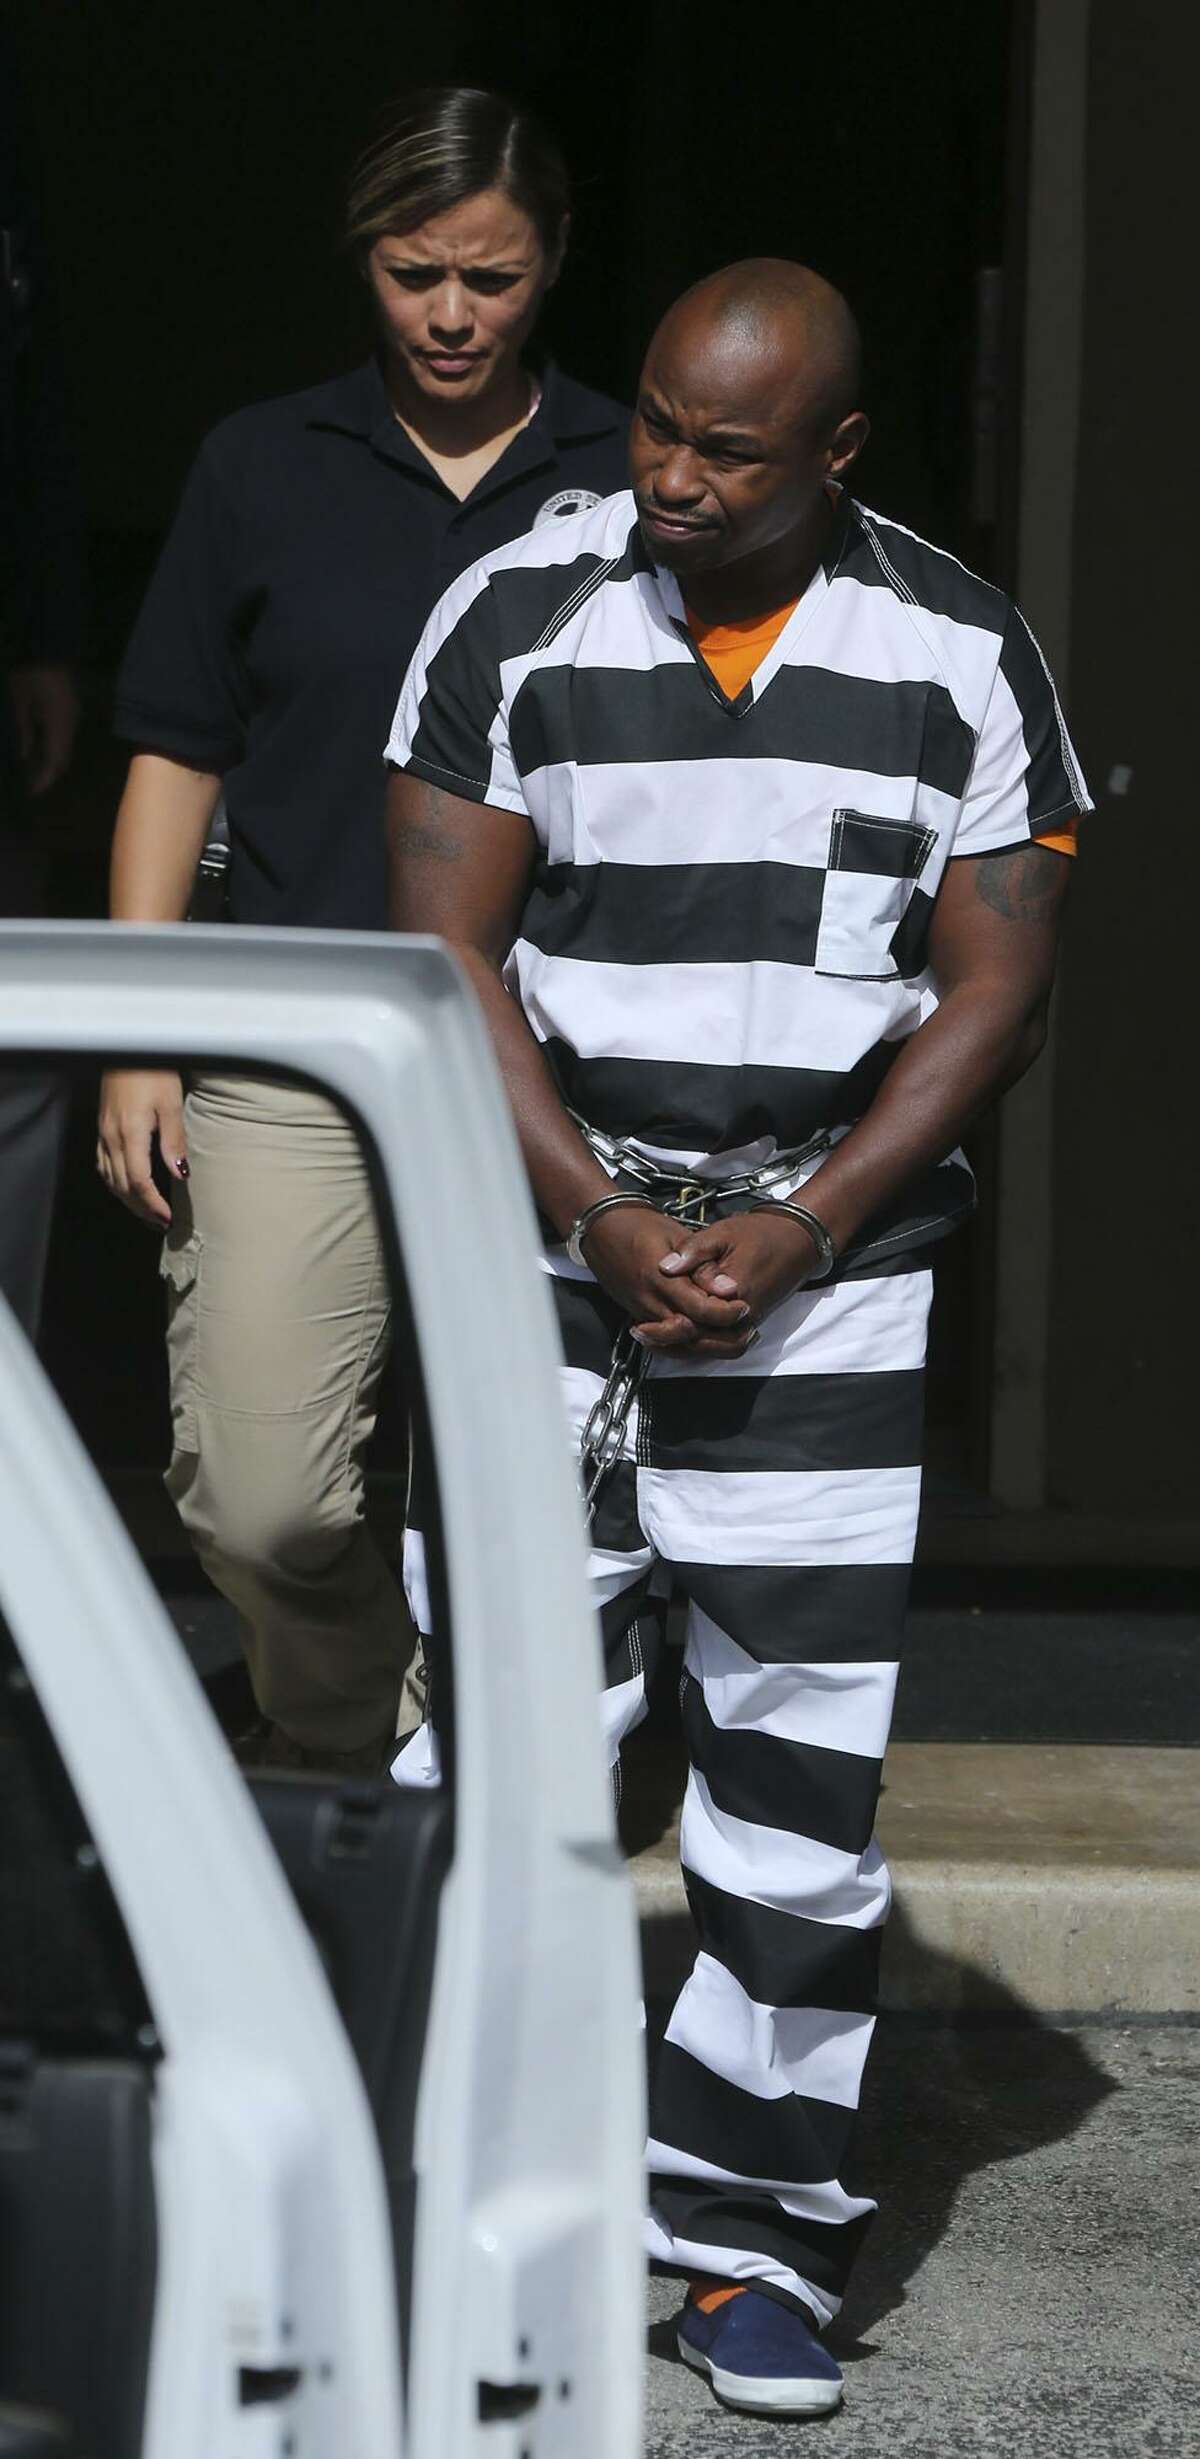 Army Sgt. 1st Class Maliek Kearney,35, is walked to an SUV Tuesday October 18, 2016 at the John H. Wood, Jr. Federal Courthouse after being denied bail. Kearney is fighting a charge that he traveled interstate to kill his wife in Maryland last year.